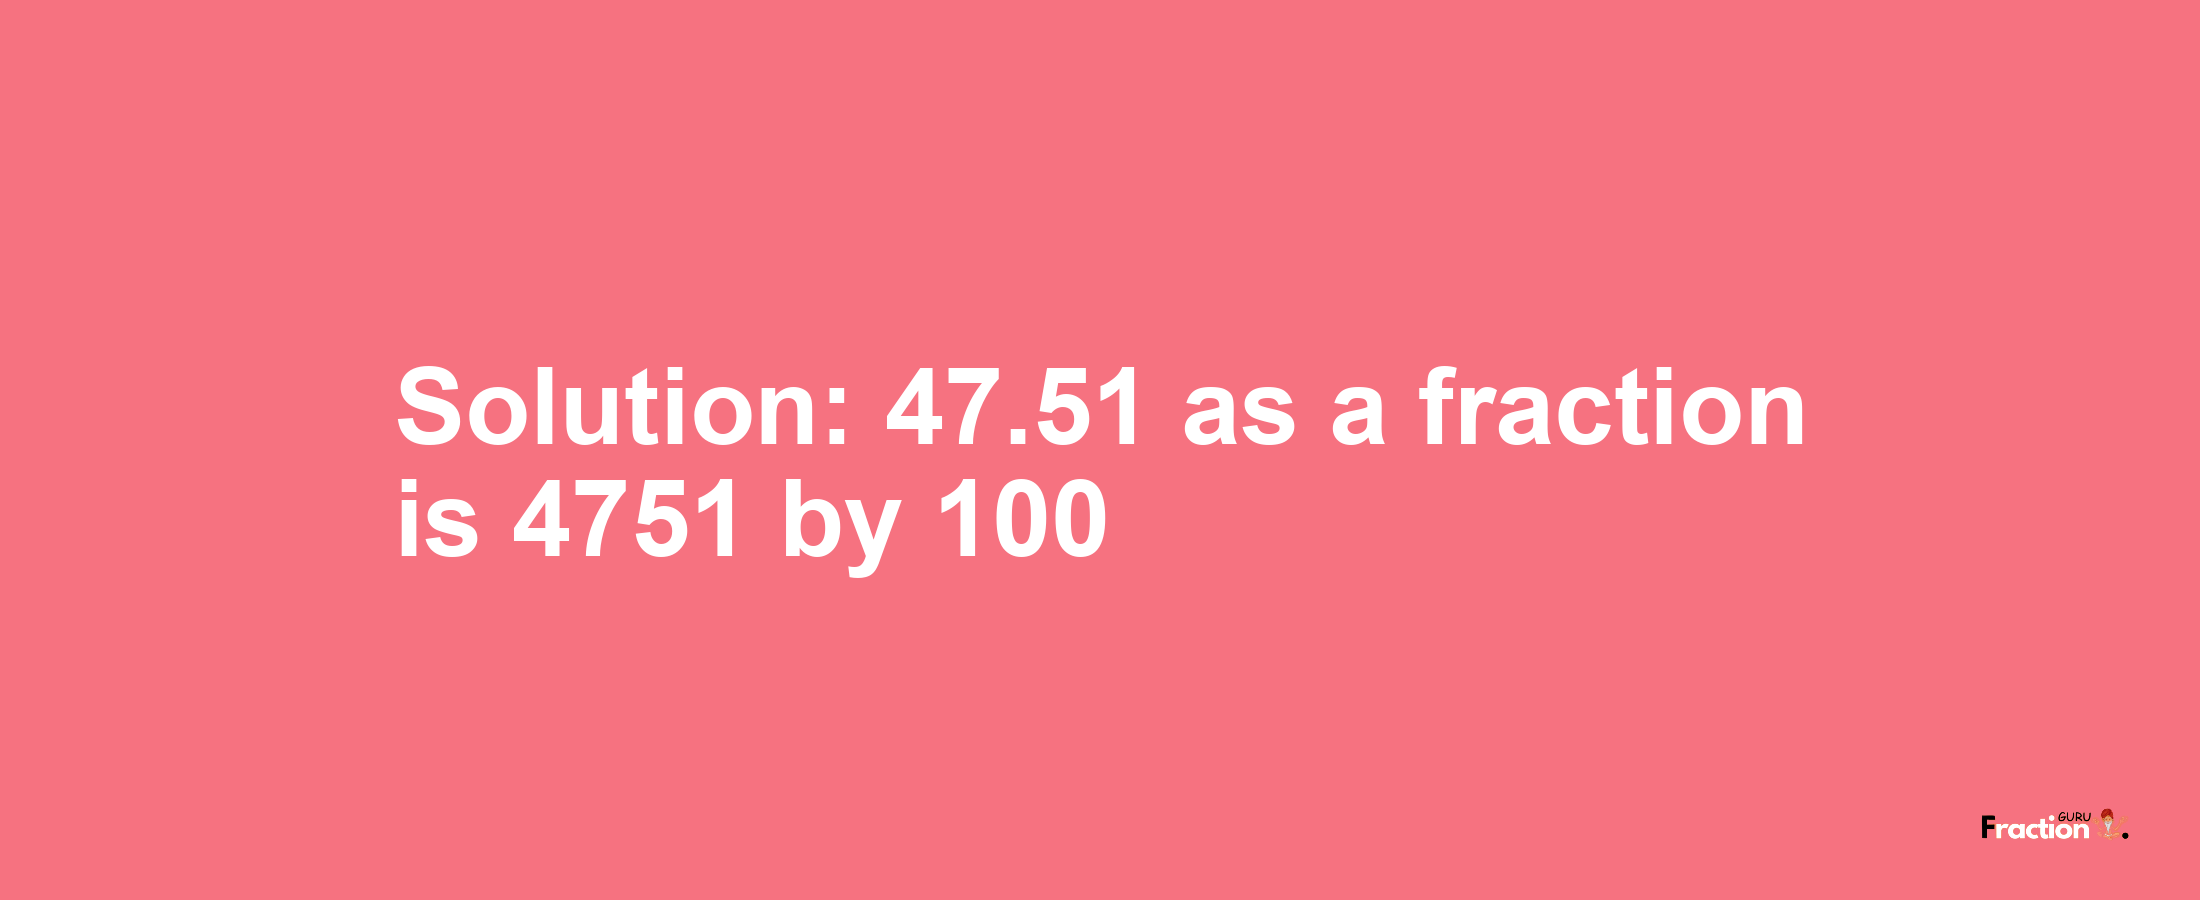 Solution:47.51 as a fraction is 4751/100